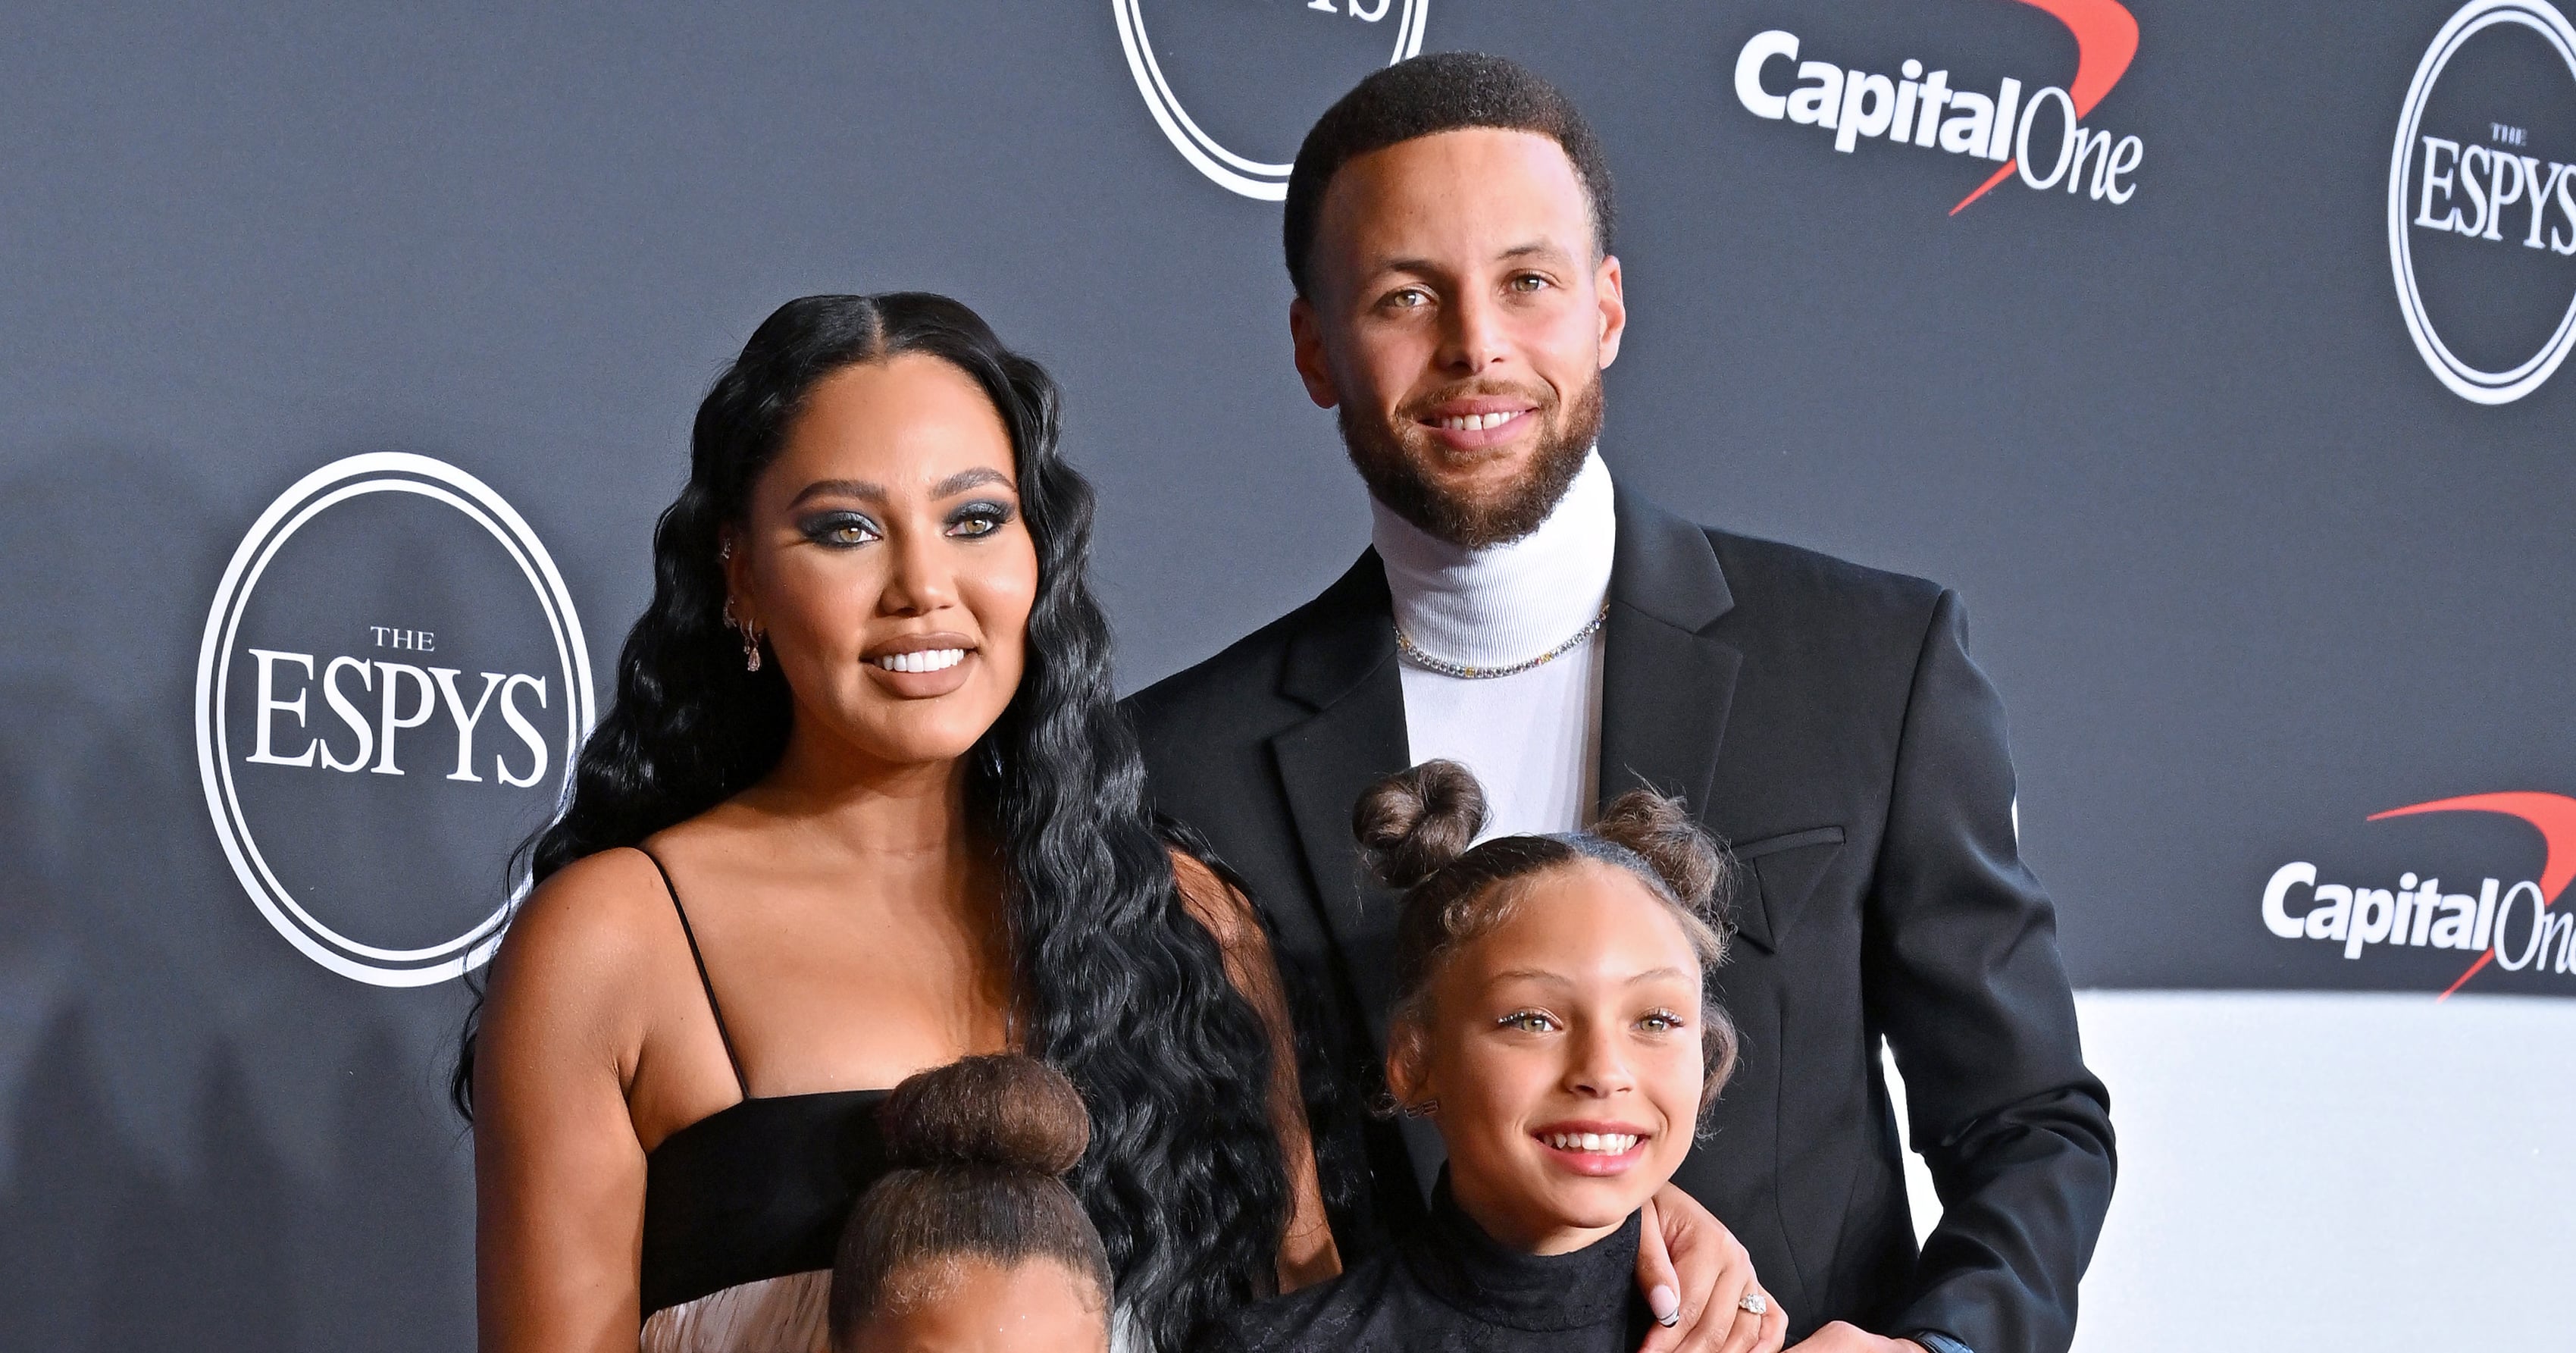 Riley Curry's Balenciaga Outfit at the ESPYs With Her Family